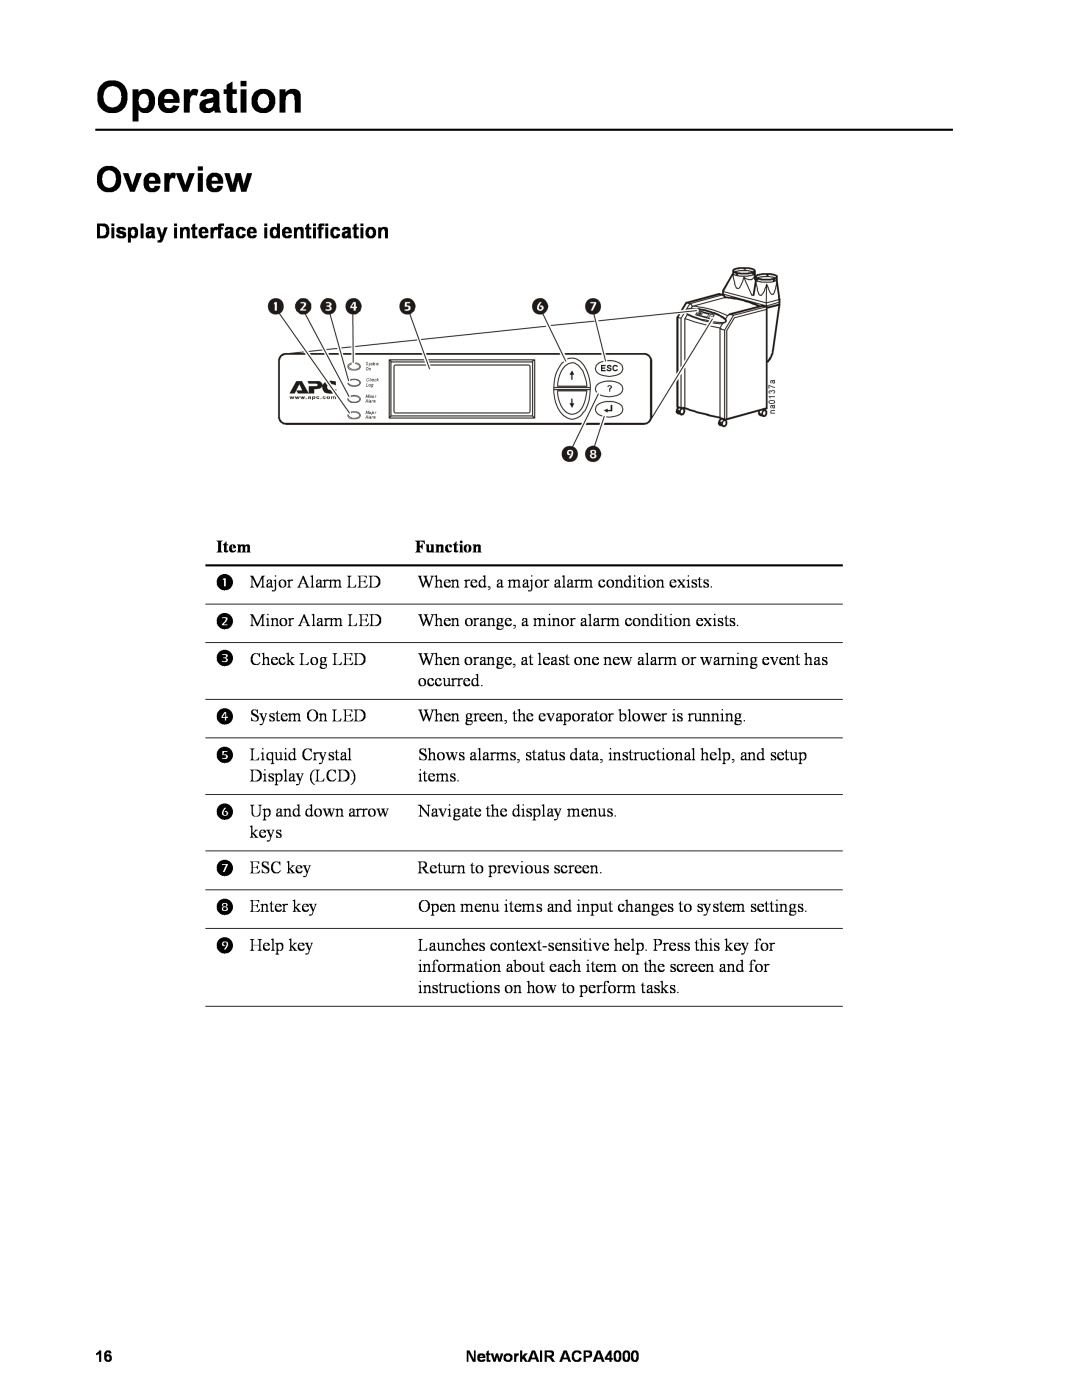 APC ACPA4000 manual Operation, Overview, Display interface identification 